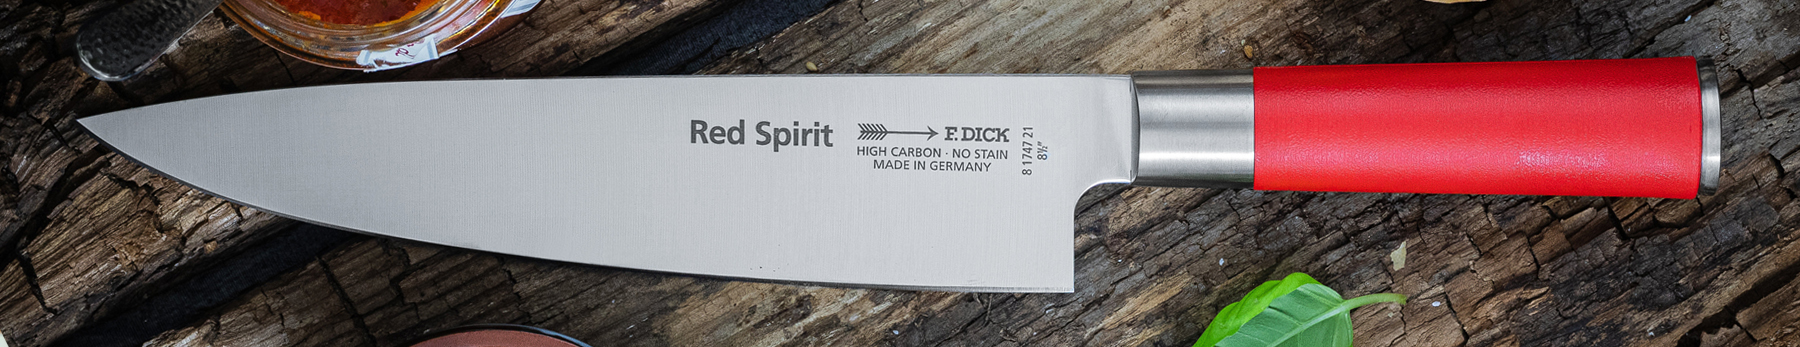 FDick Red Spirit Chef knife displayed in an image banner